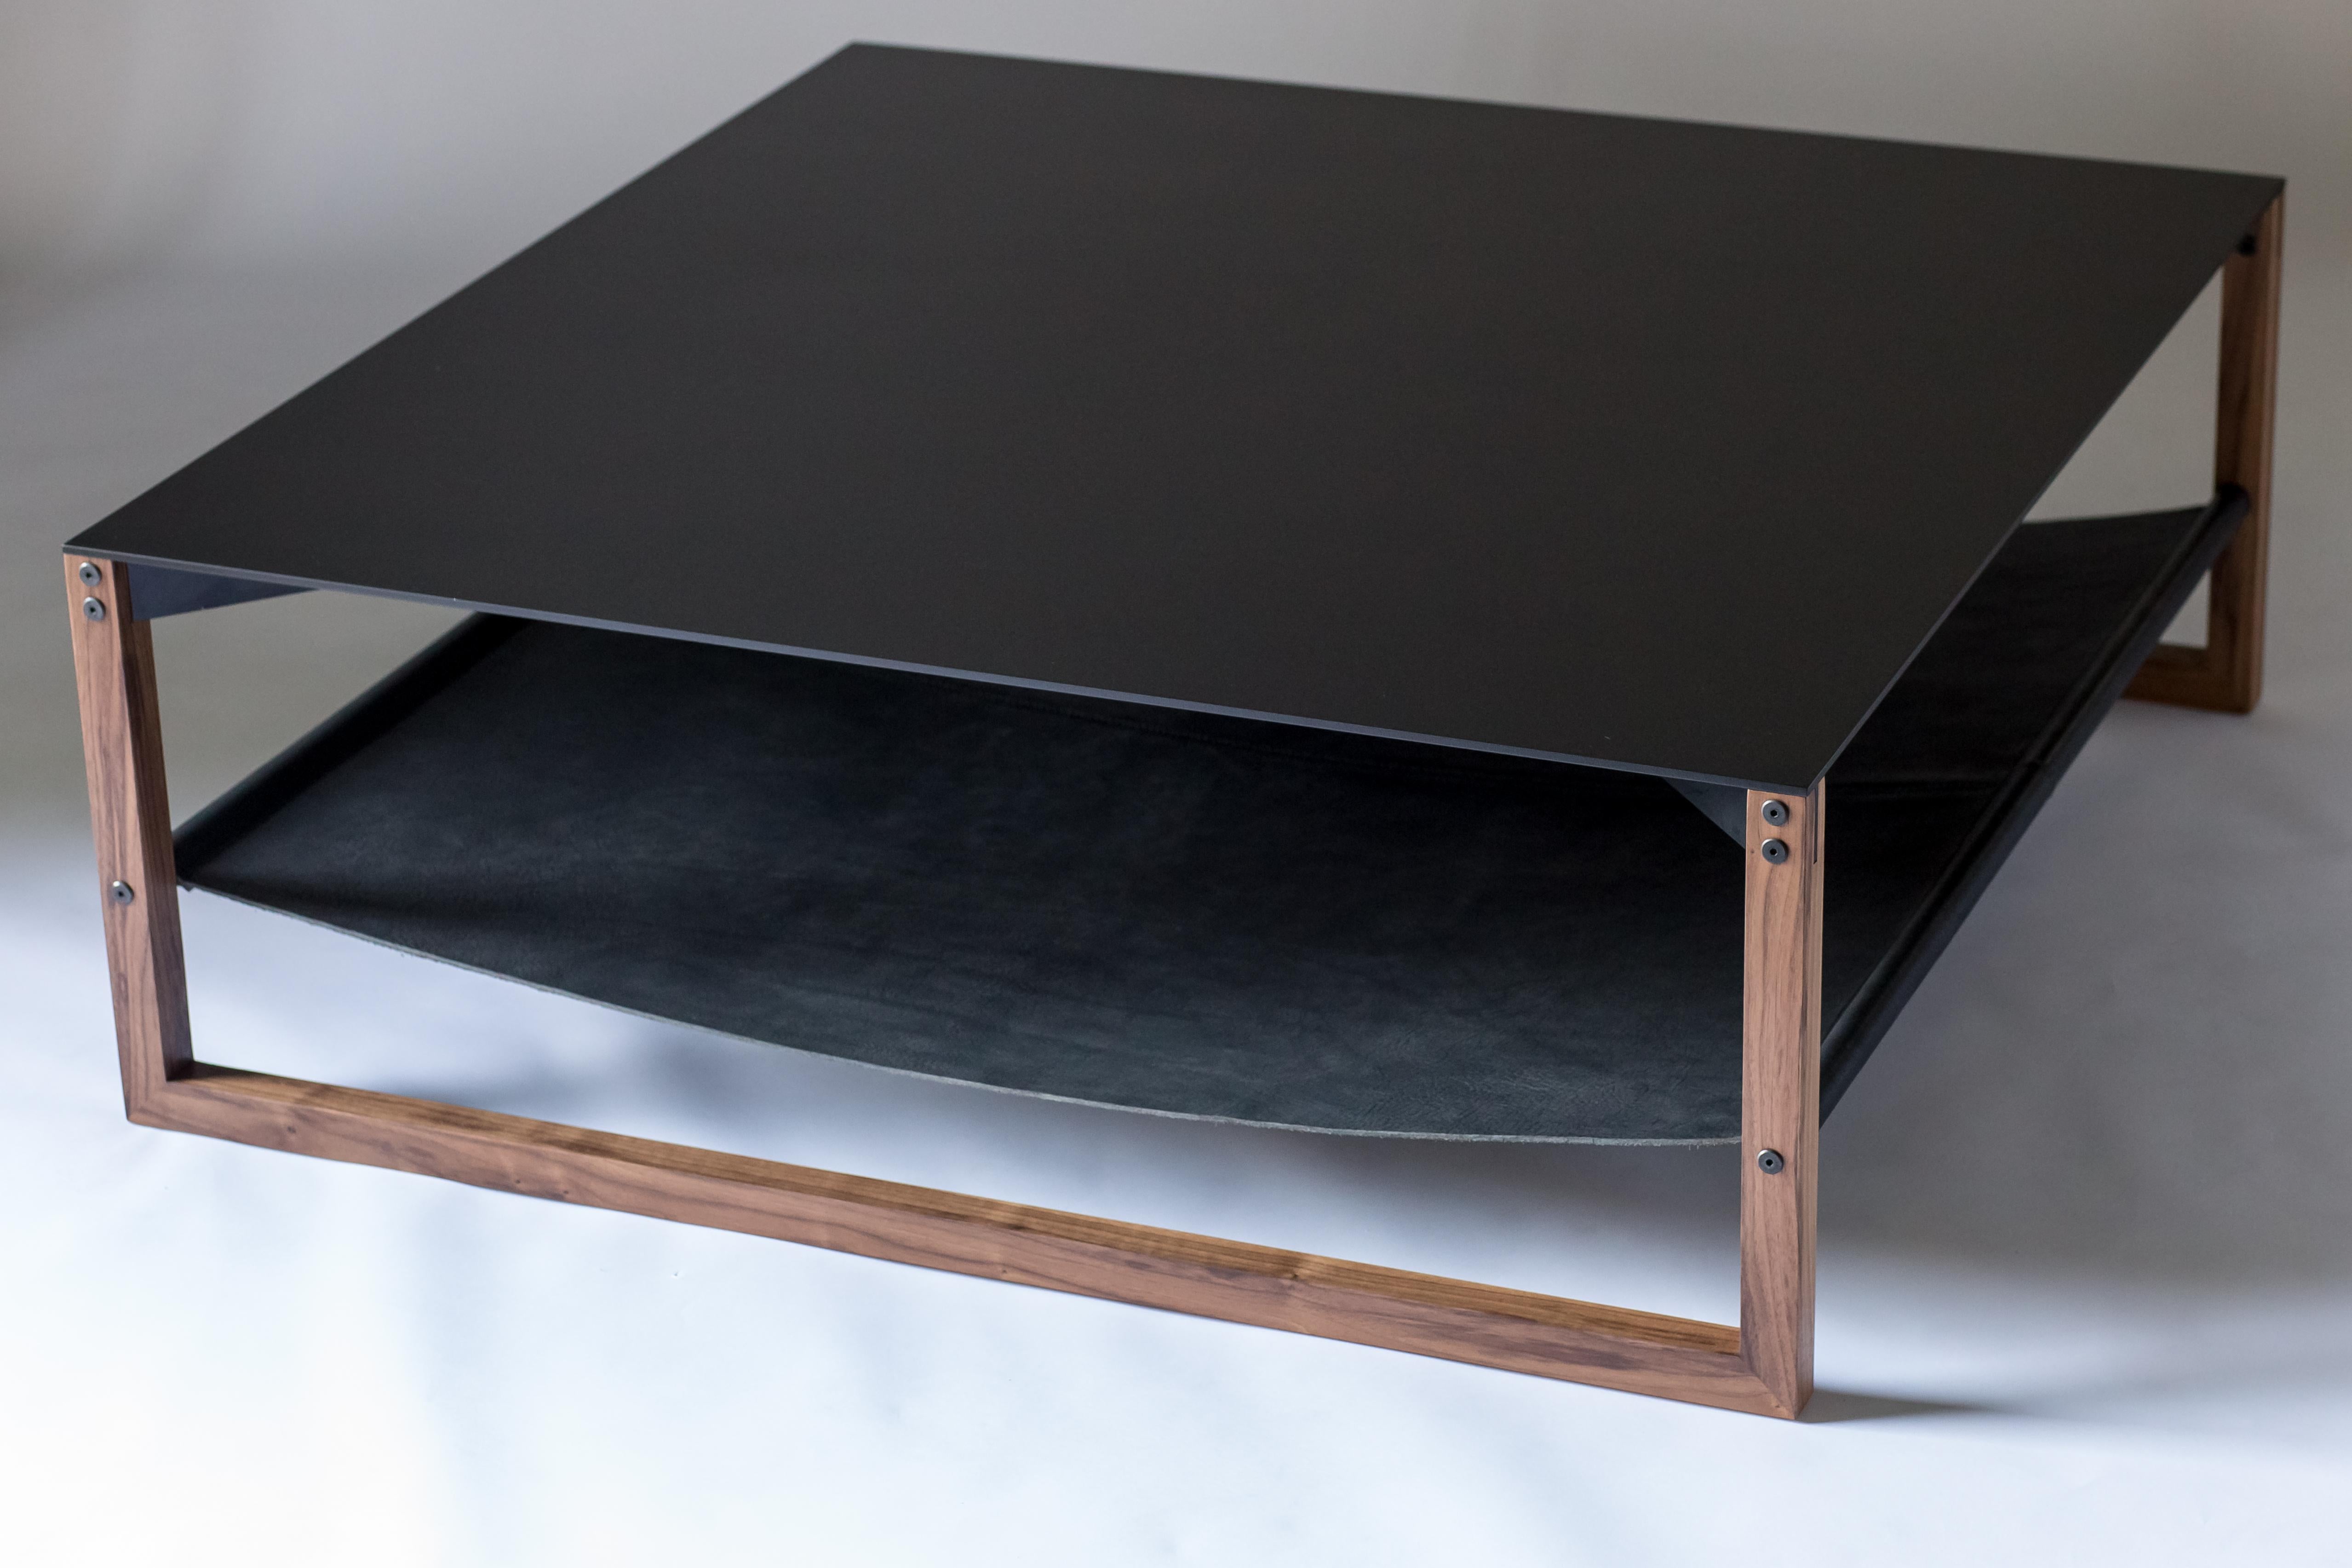 The Sling, Modern Aluminum, Leather and Walnut Square Coffee Table im Zustand „Neu“ im Angebot in West Linn, OR